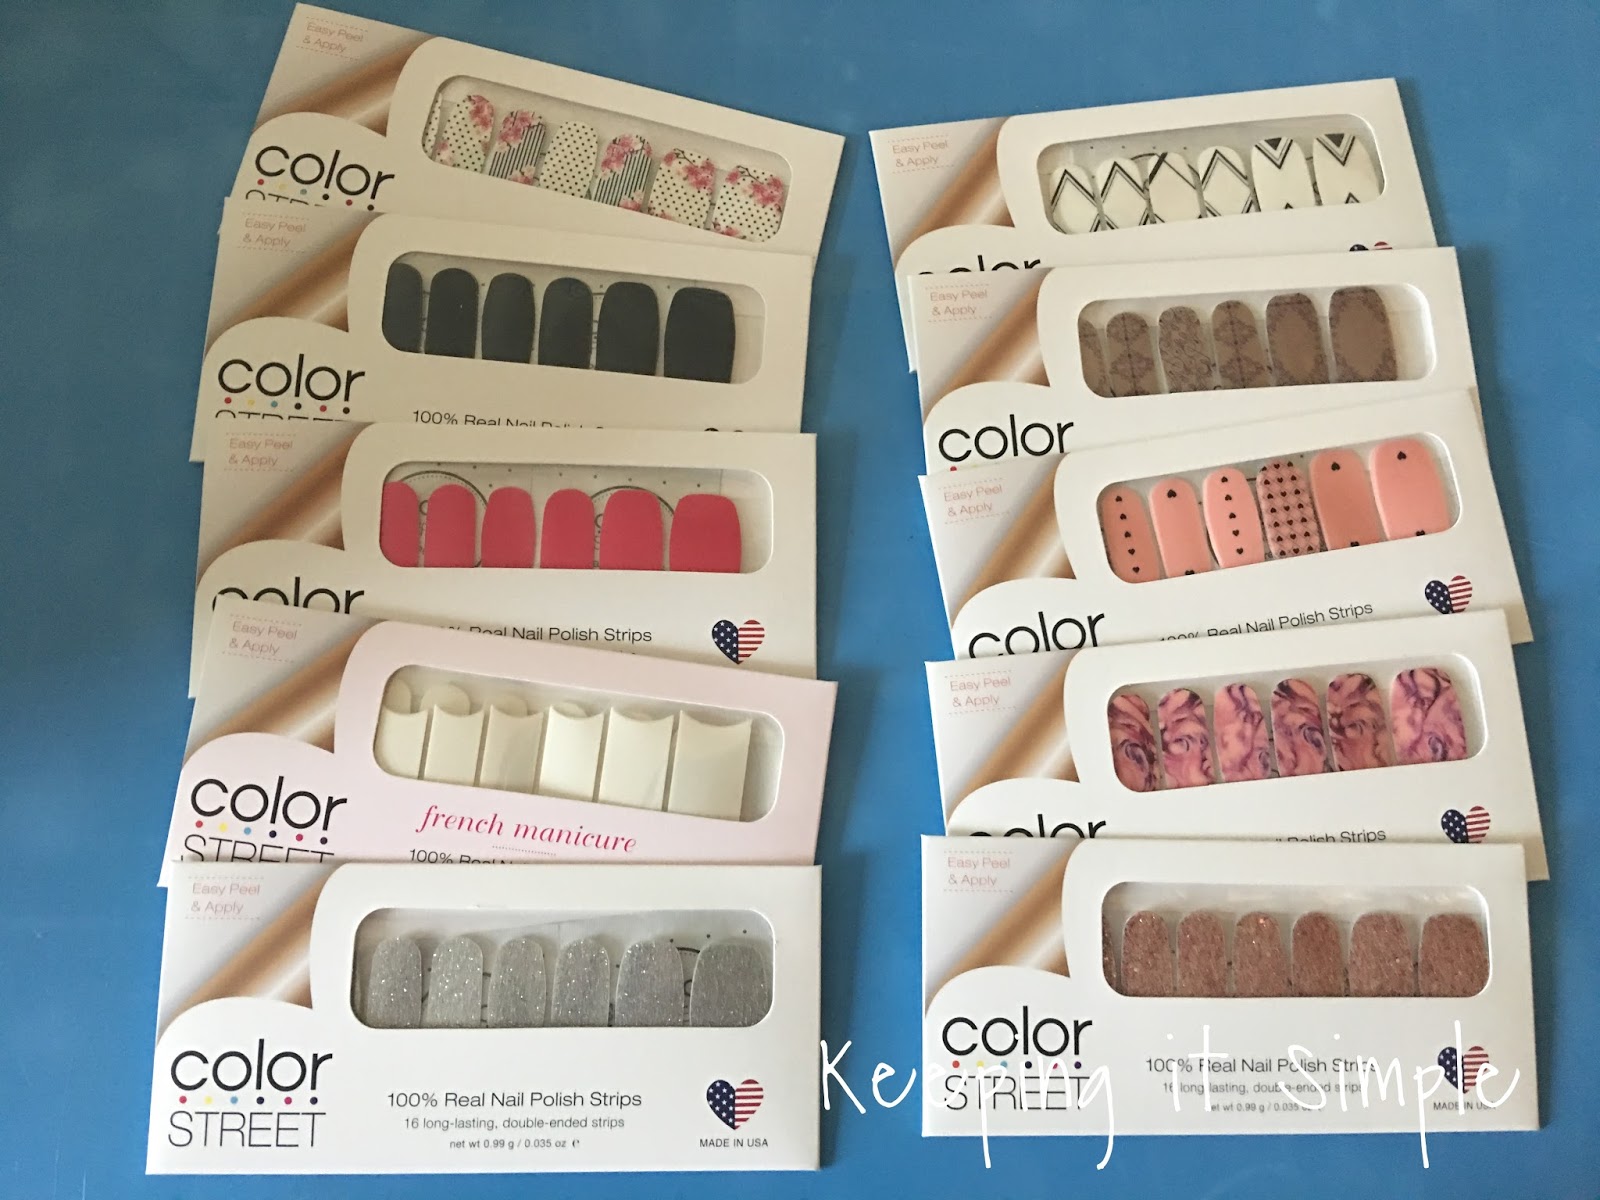 Keeping it Simple Introducing Color STREET 100 Nail Polish Strips